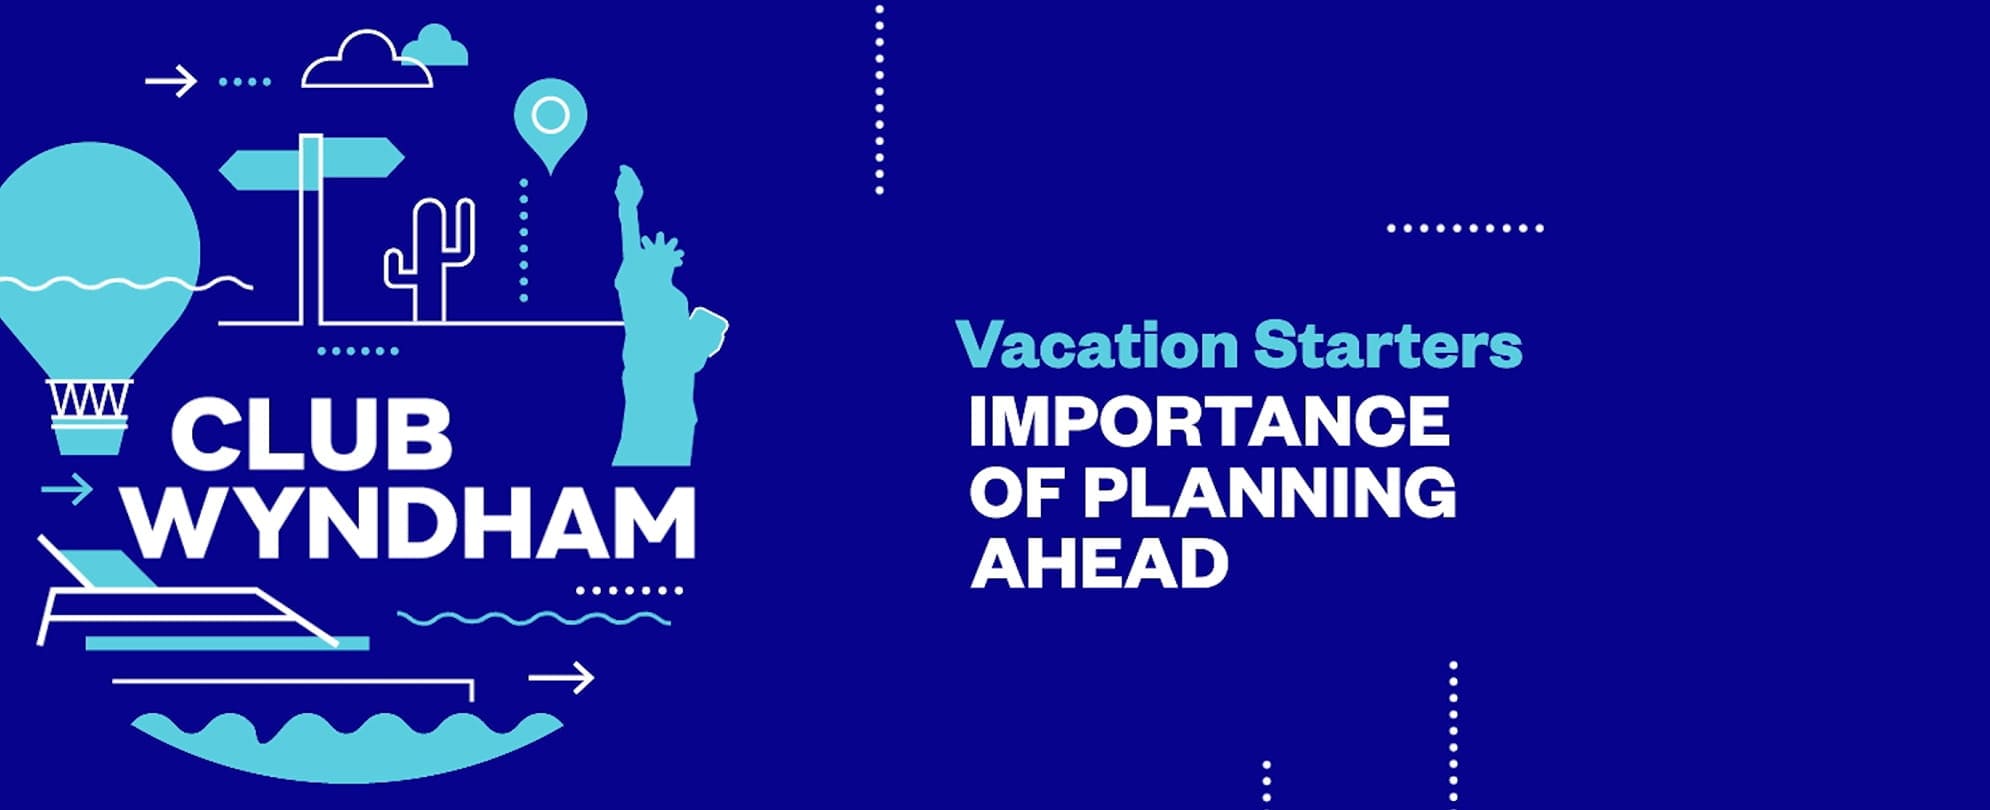 Importance of Planning Ahead overview from the Club Wyndham Vacation Starters video series